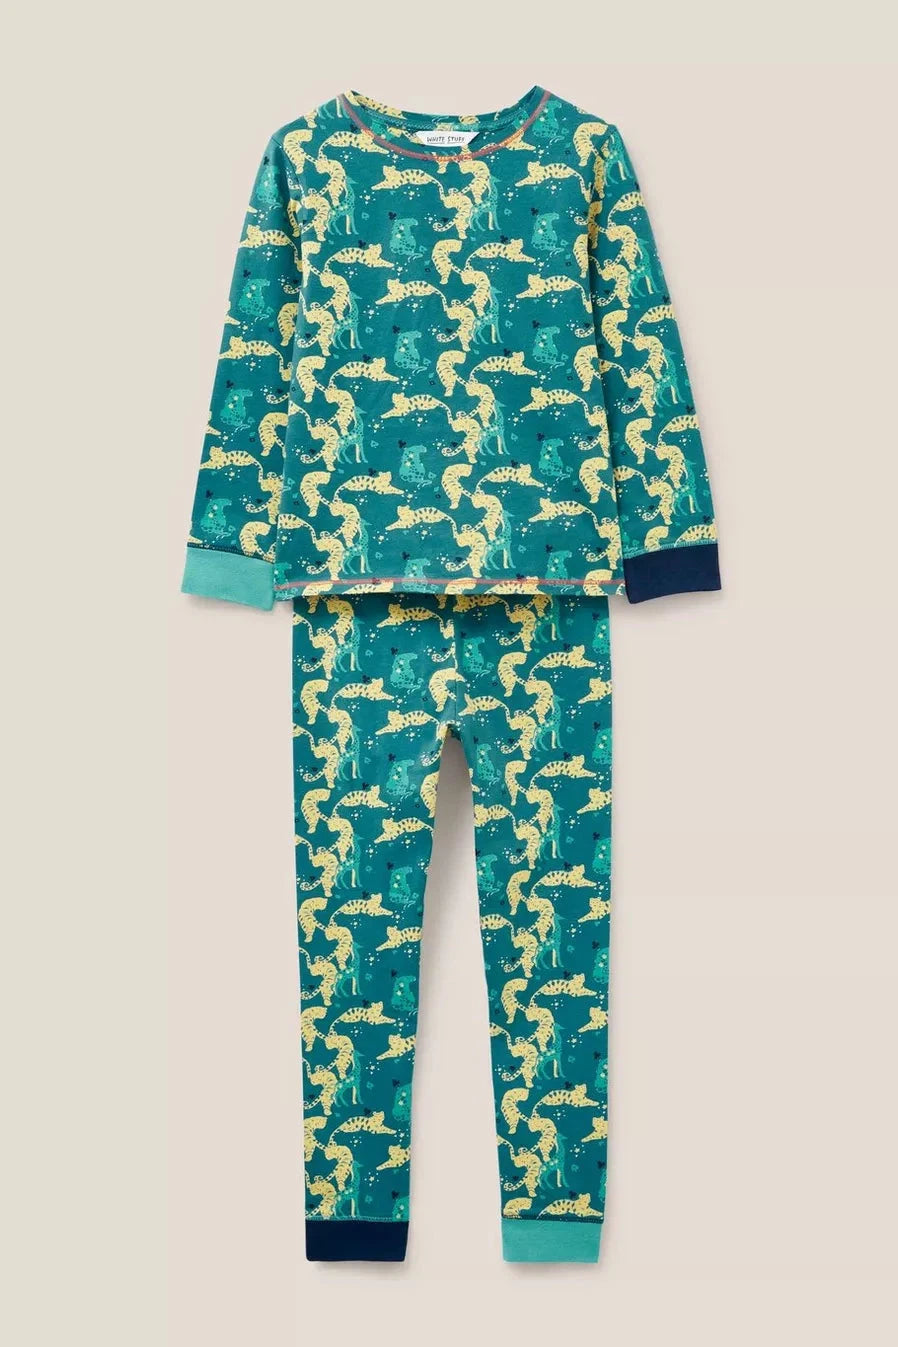 White Stuff Kids Tiger Printed PJ Set-Kids-Ohh! By Gum - Shop Sustainable